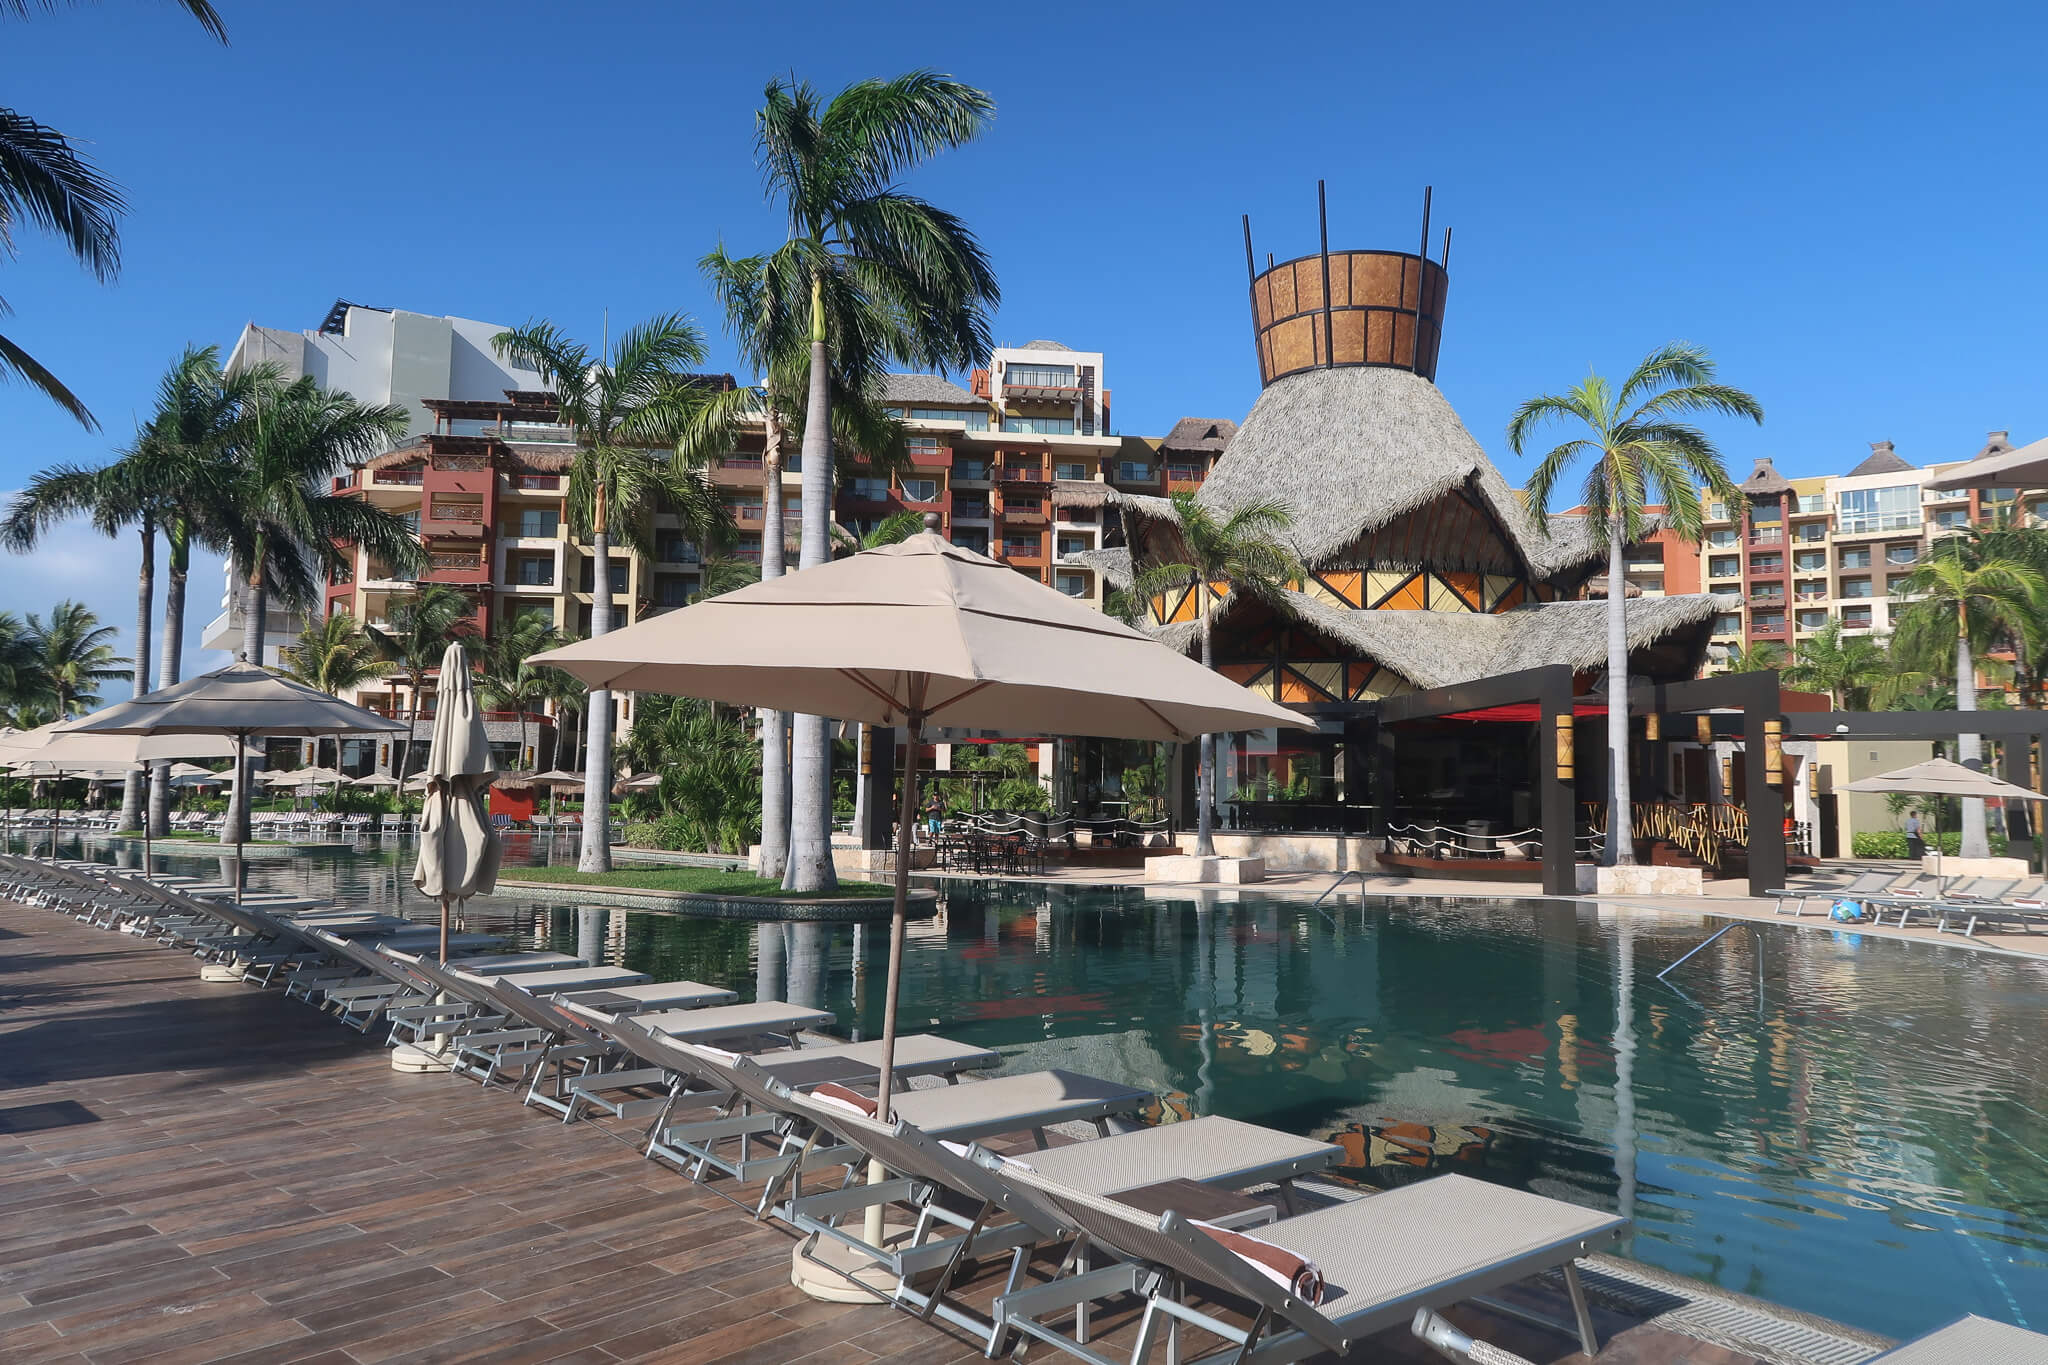 The main pool at the Villa del Palmar Cancun is where we spent most of our time while there.